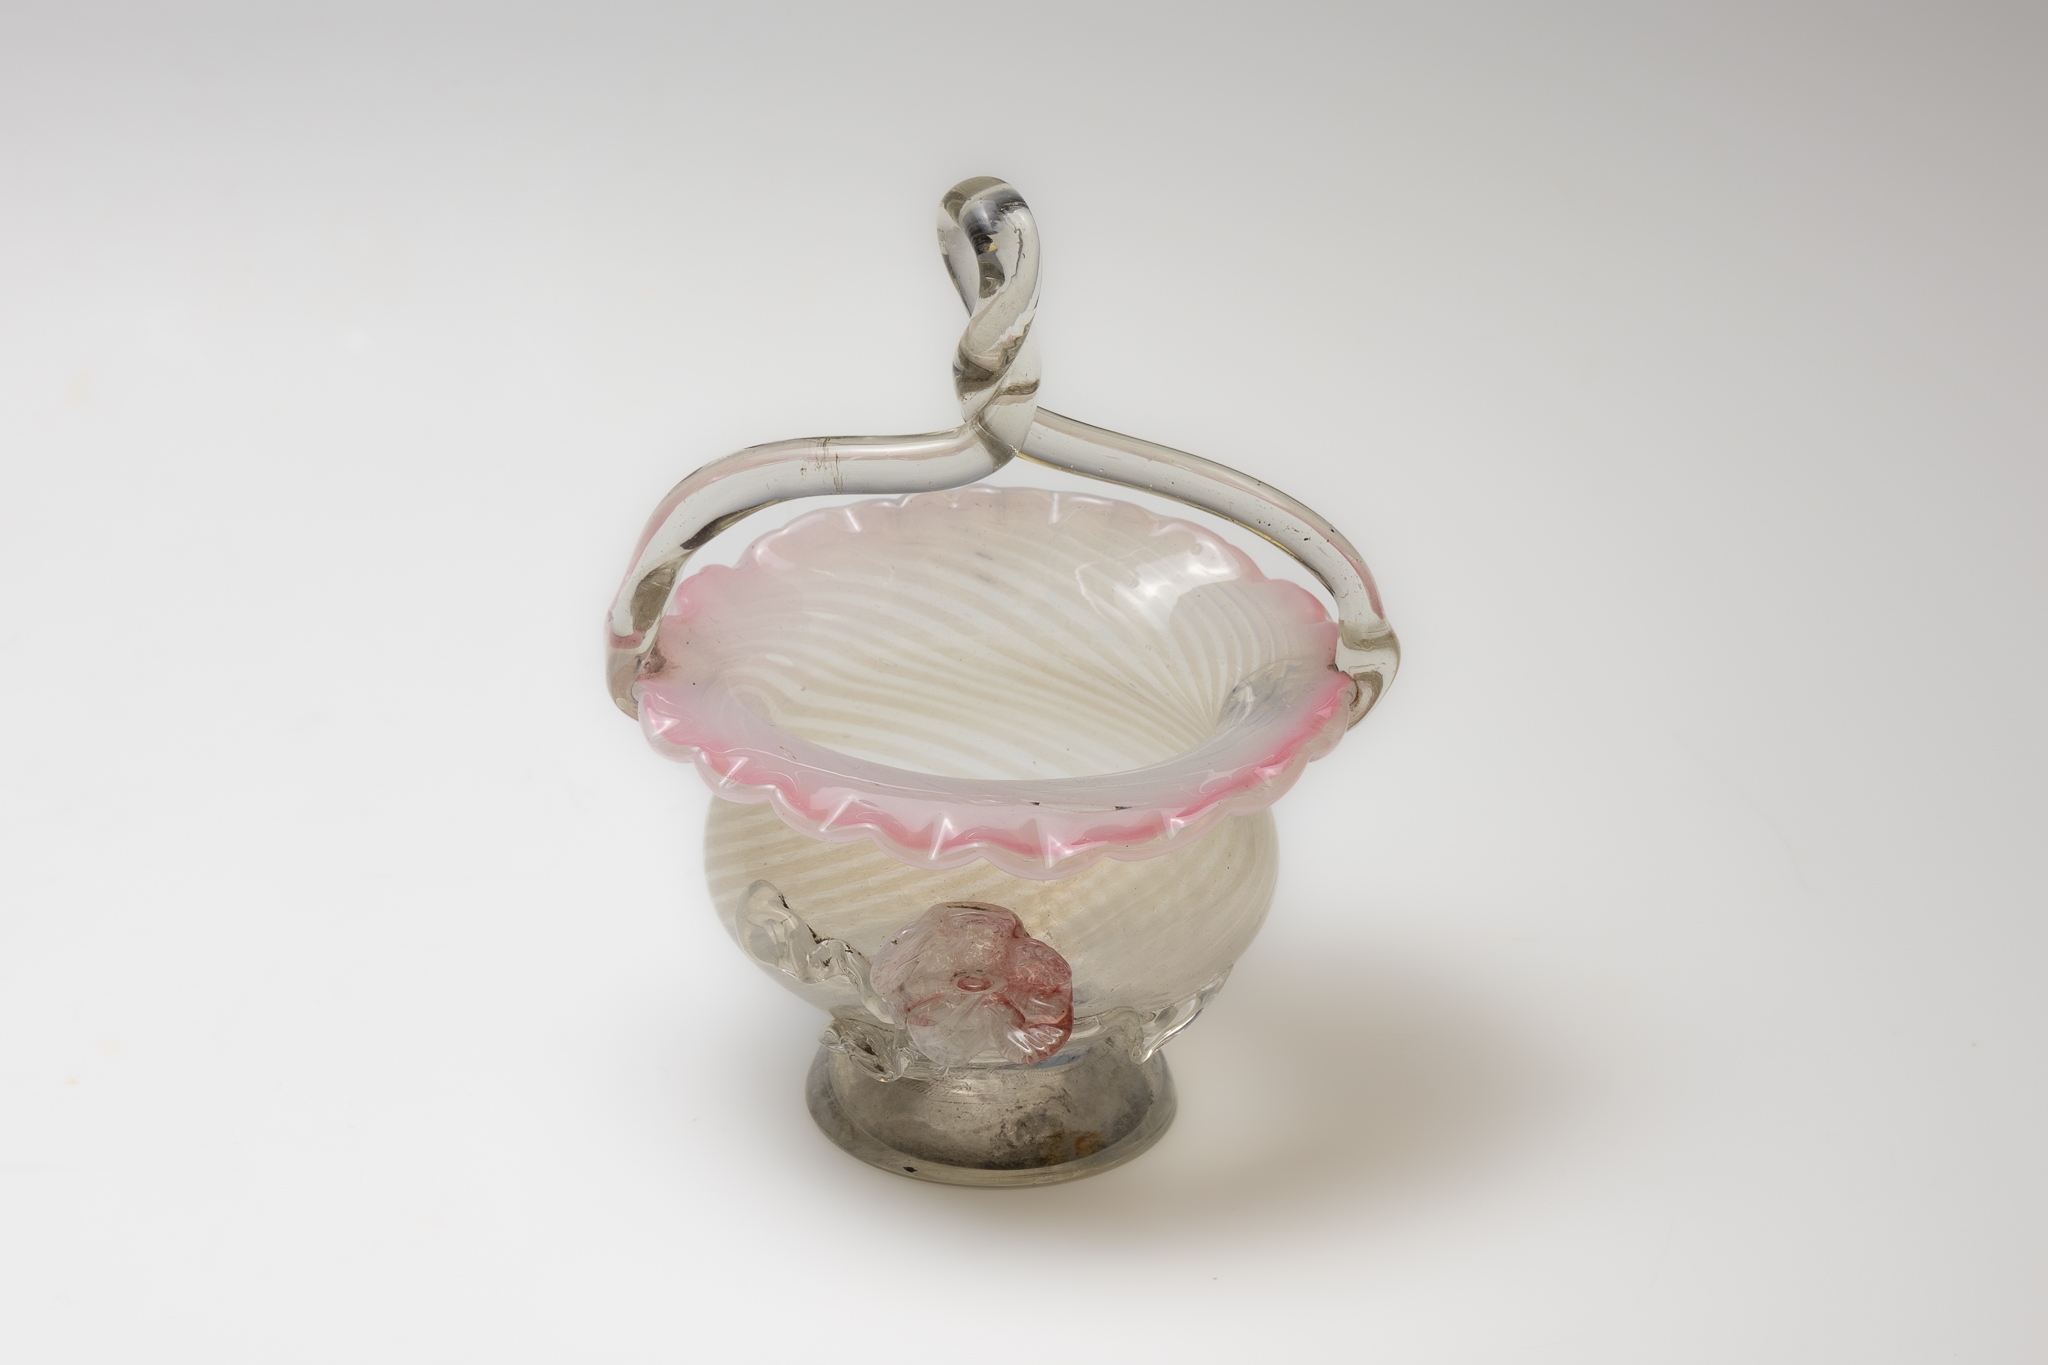 A Victorian Glass Basket from the 19th Century.

H: Approximately 17cm 